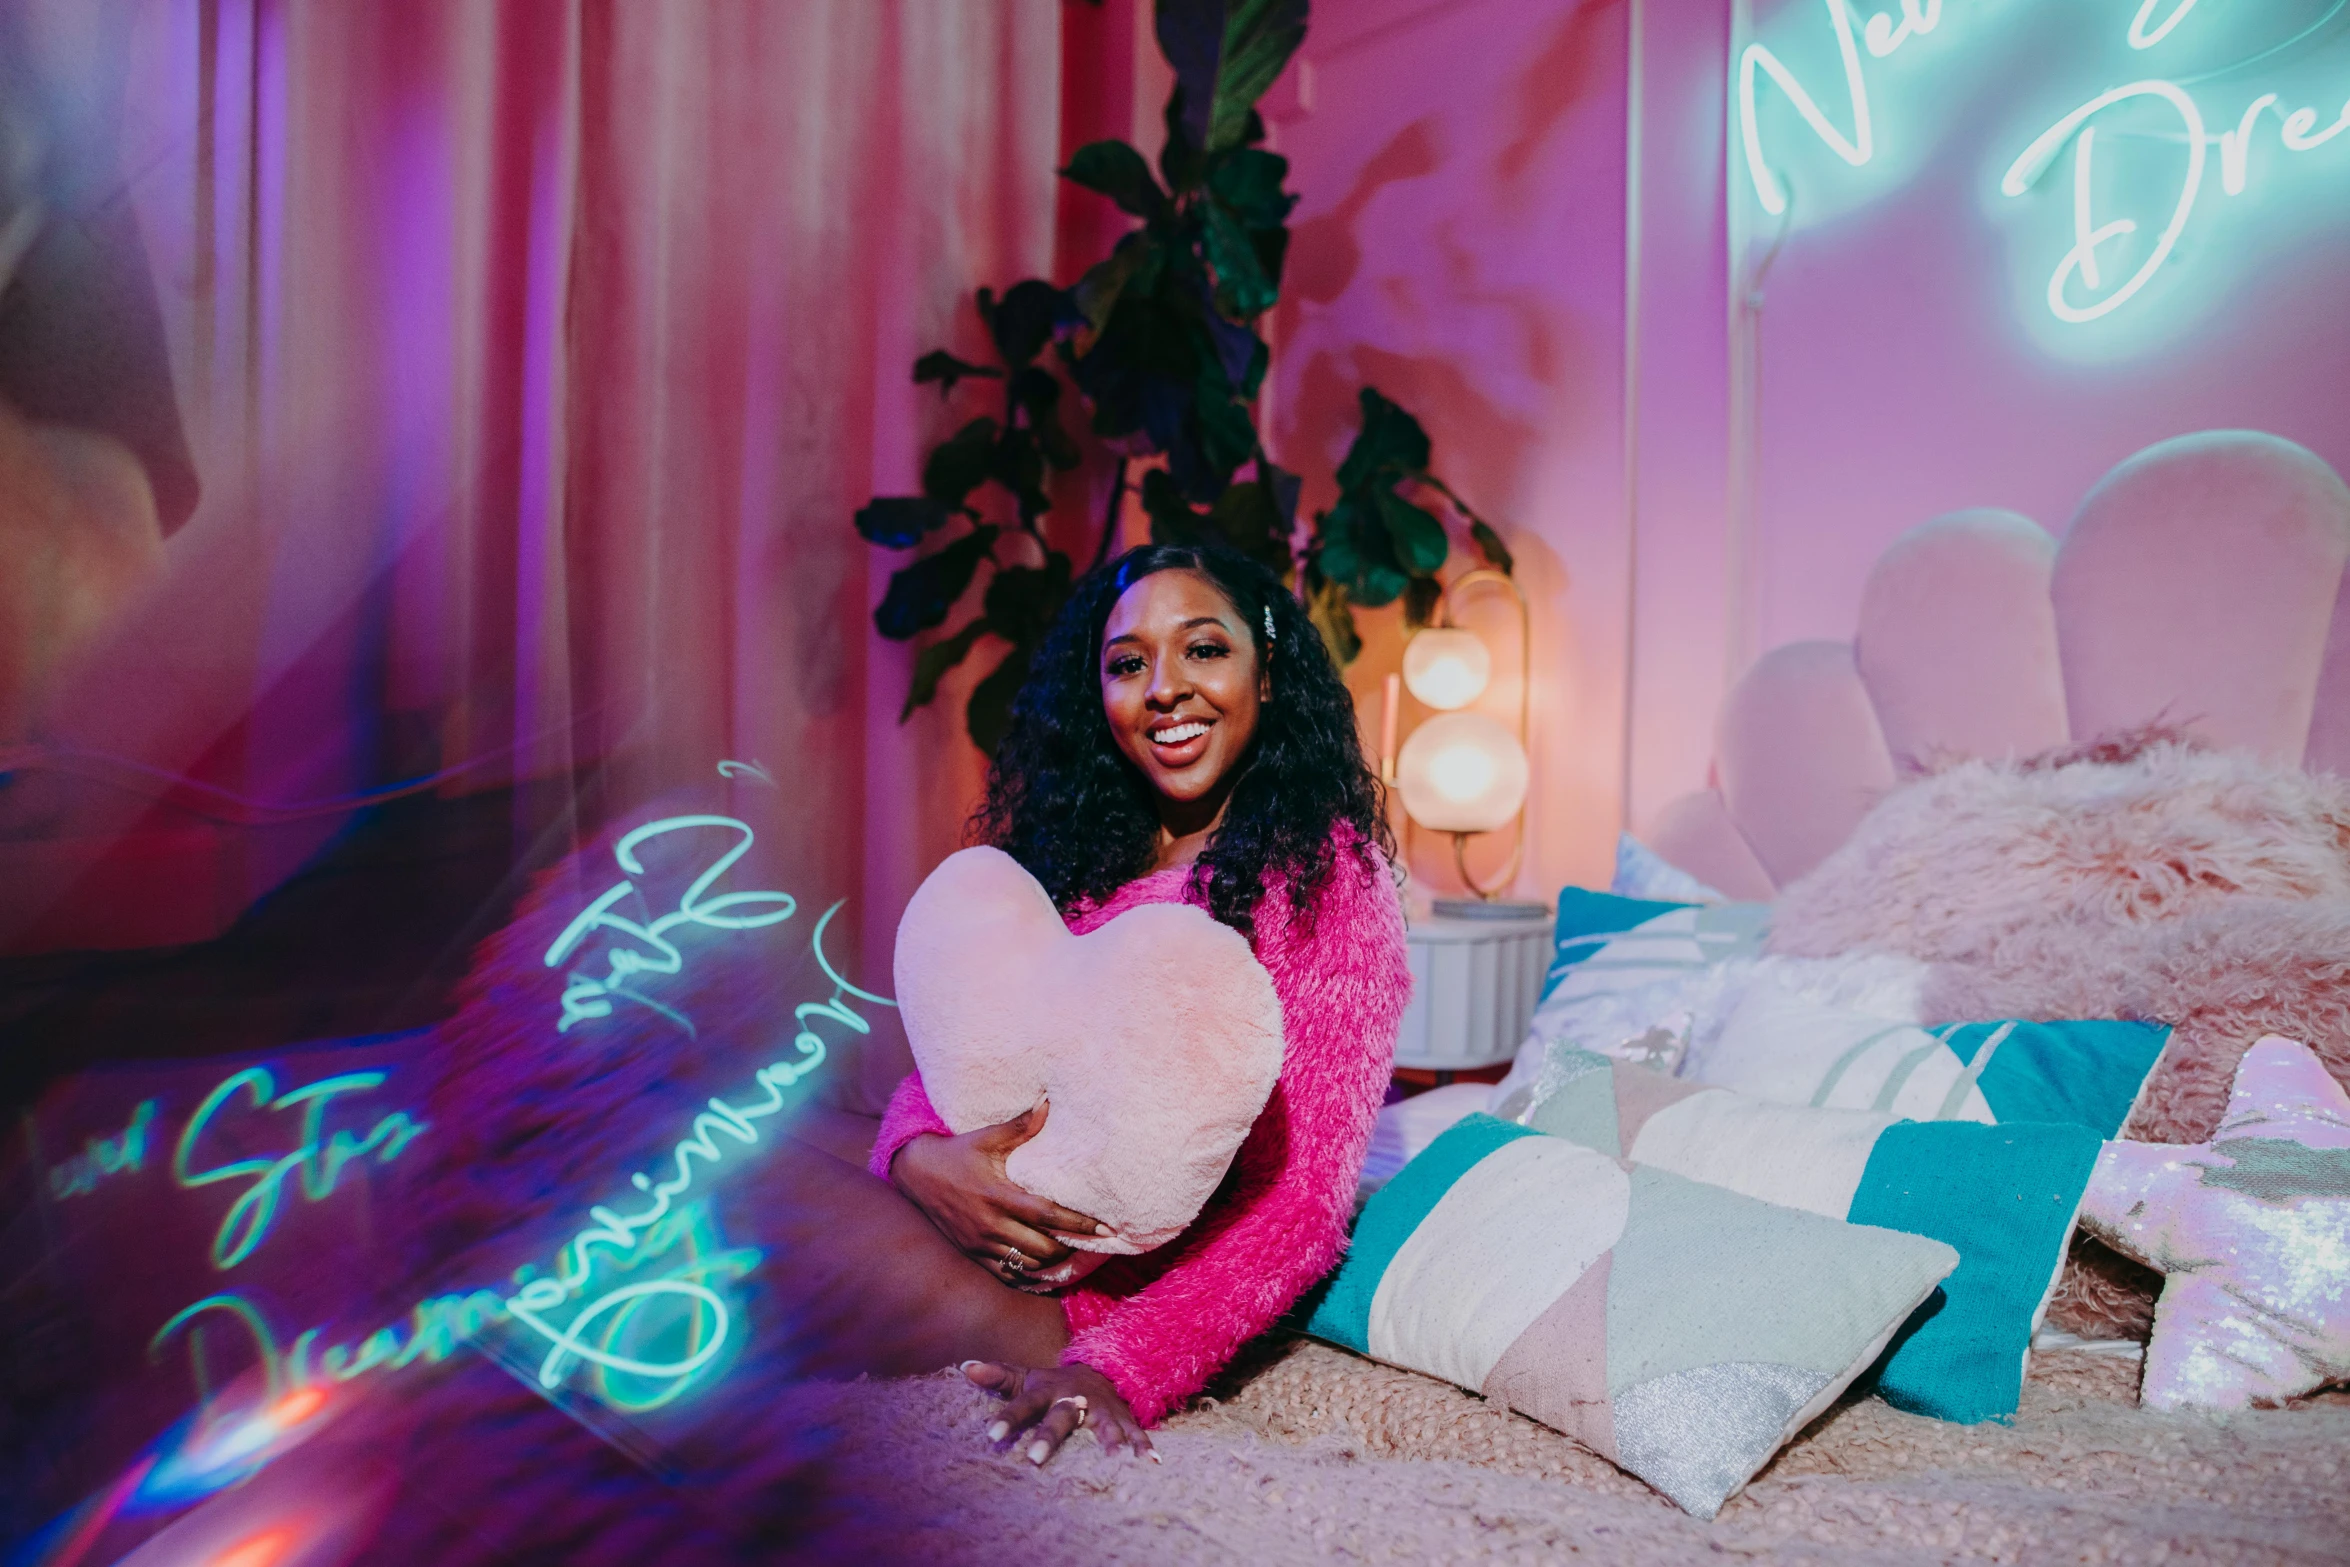 a woman sitting on top of a bed holding a pillow, trending on pexels, graffiti, pink neon lights, nicki minaj curvy, ☁🌪🌙👩🏾, product introduction photo